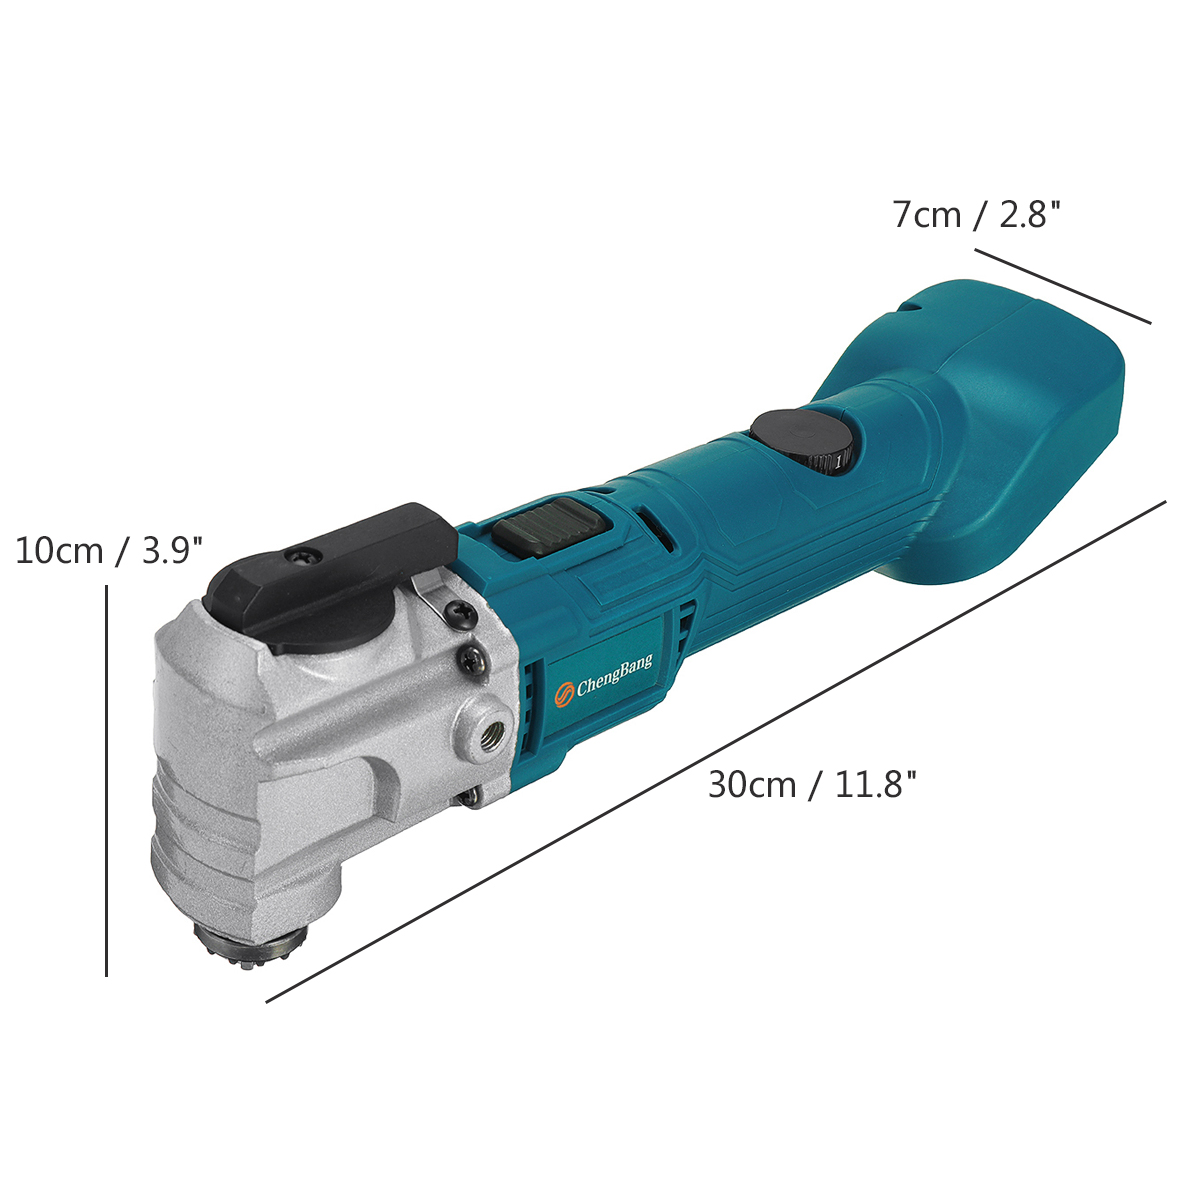 25mm-6-Speed-Brushless-Rechargeable-Angle-Grinder-Cordless-Electric-Grinder-Polishing-Machine-Oscill-1914411-6